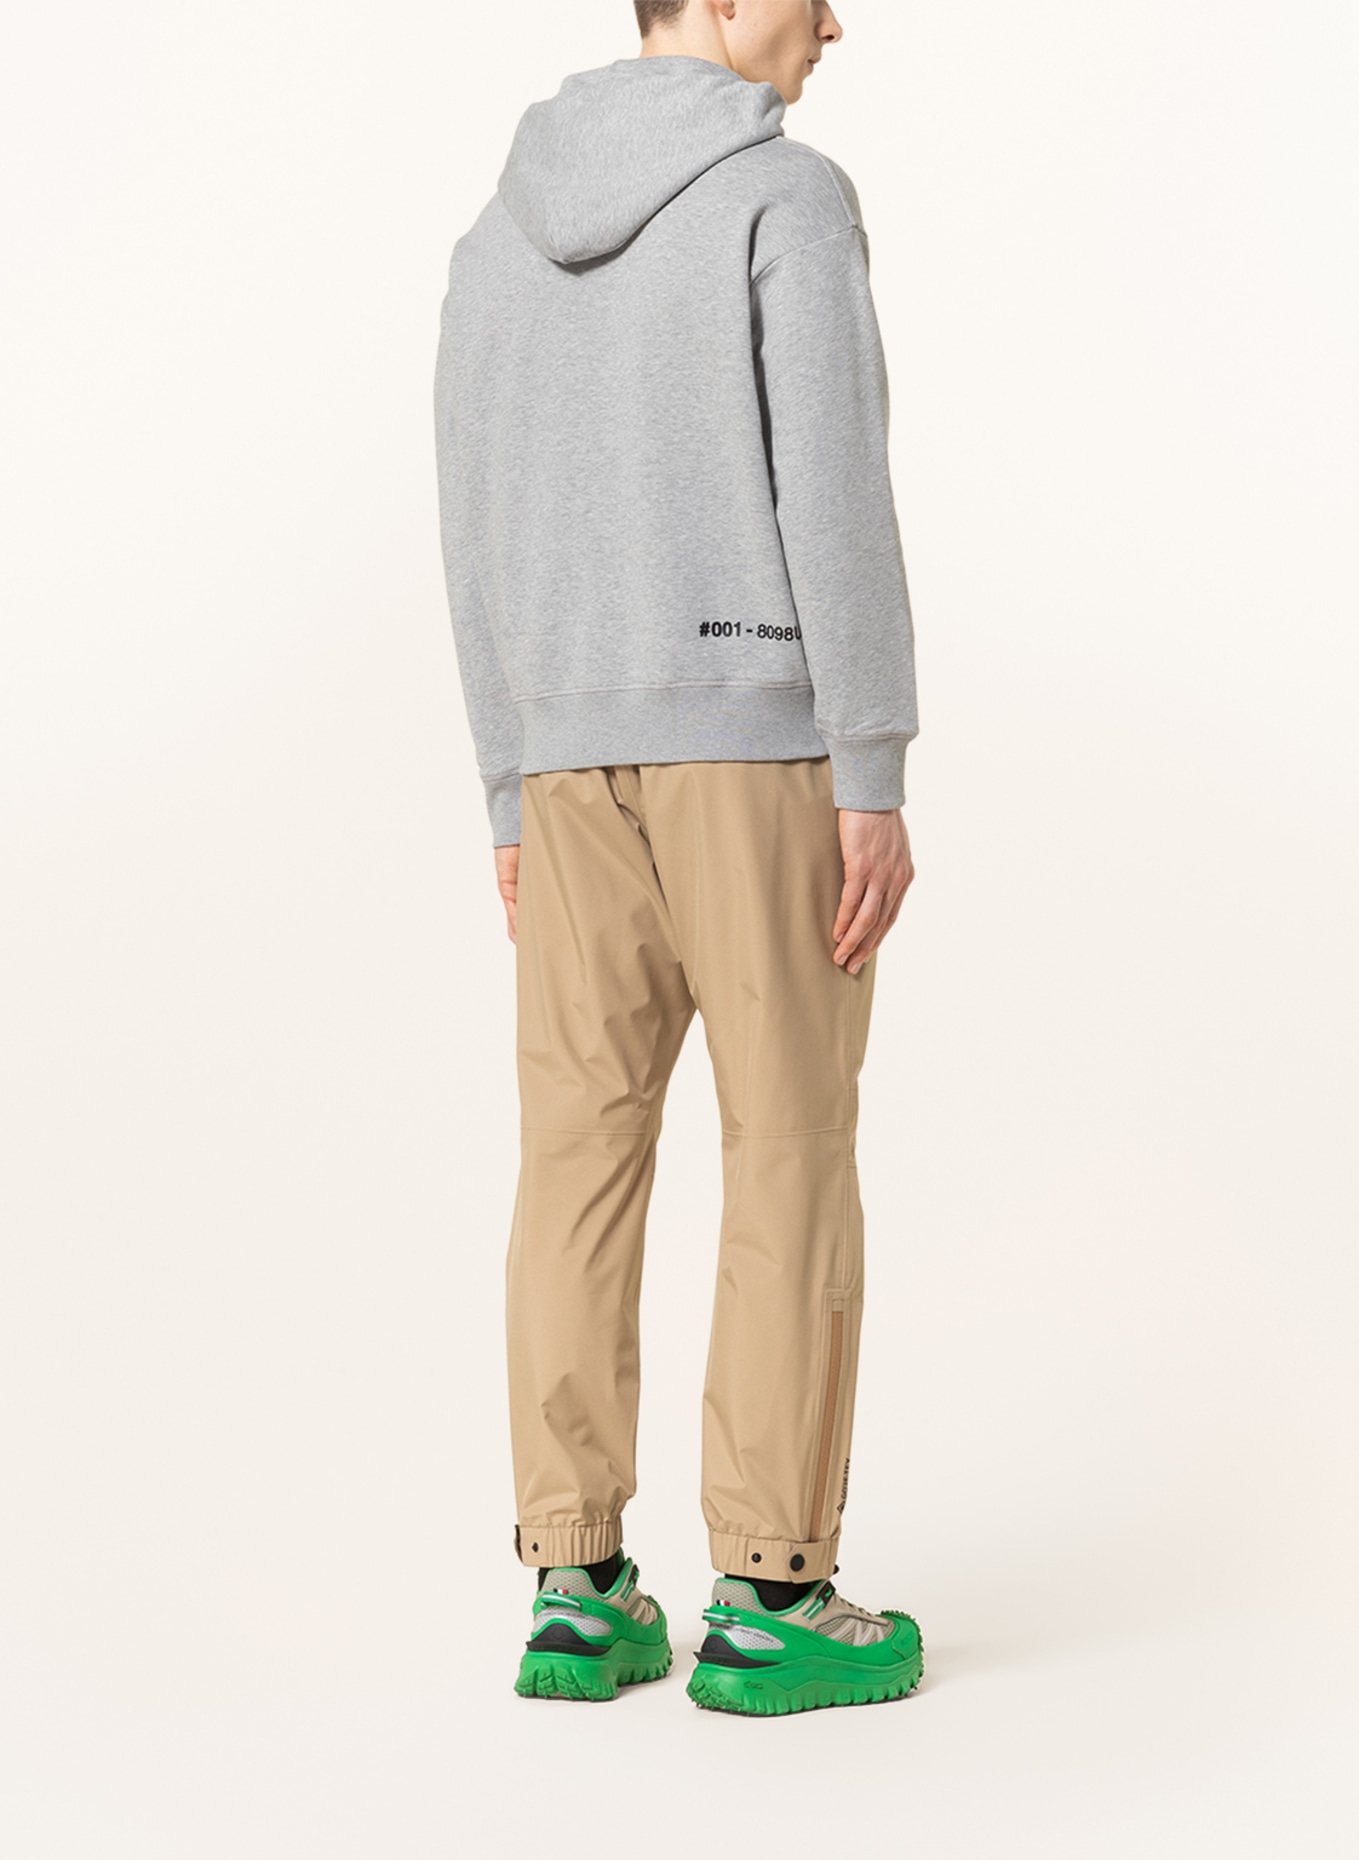 MONCLER GRENOBLE Hoodie, Color: LIGHT GRAY (Image 3)